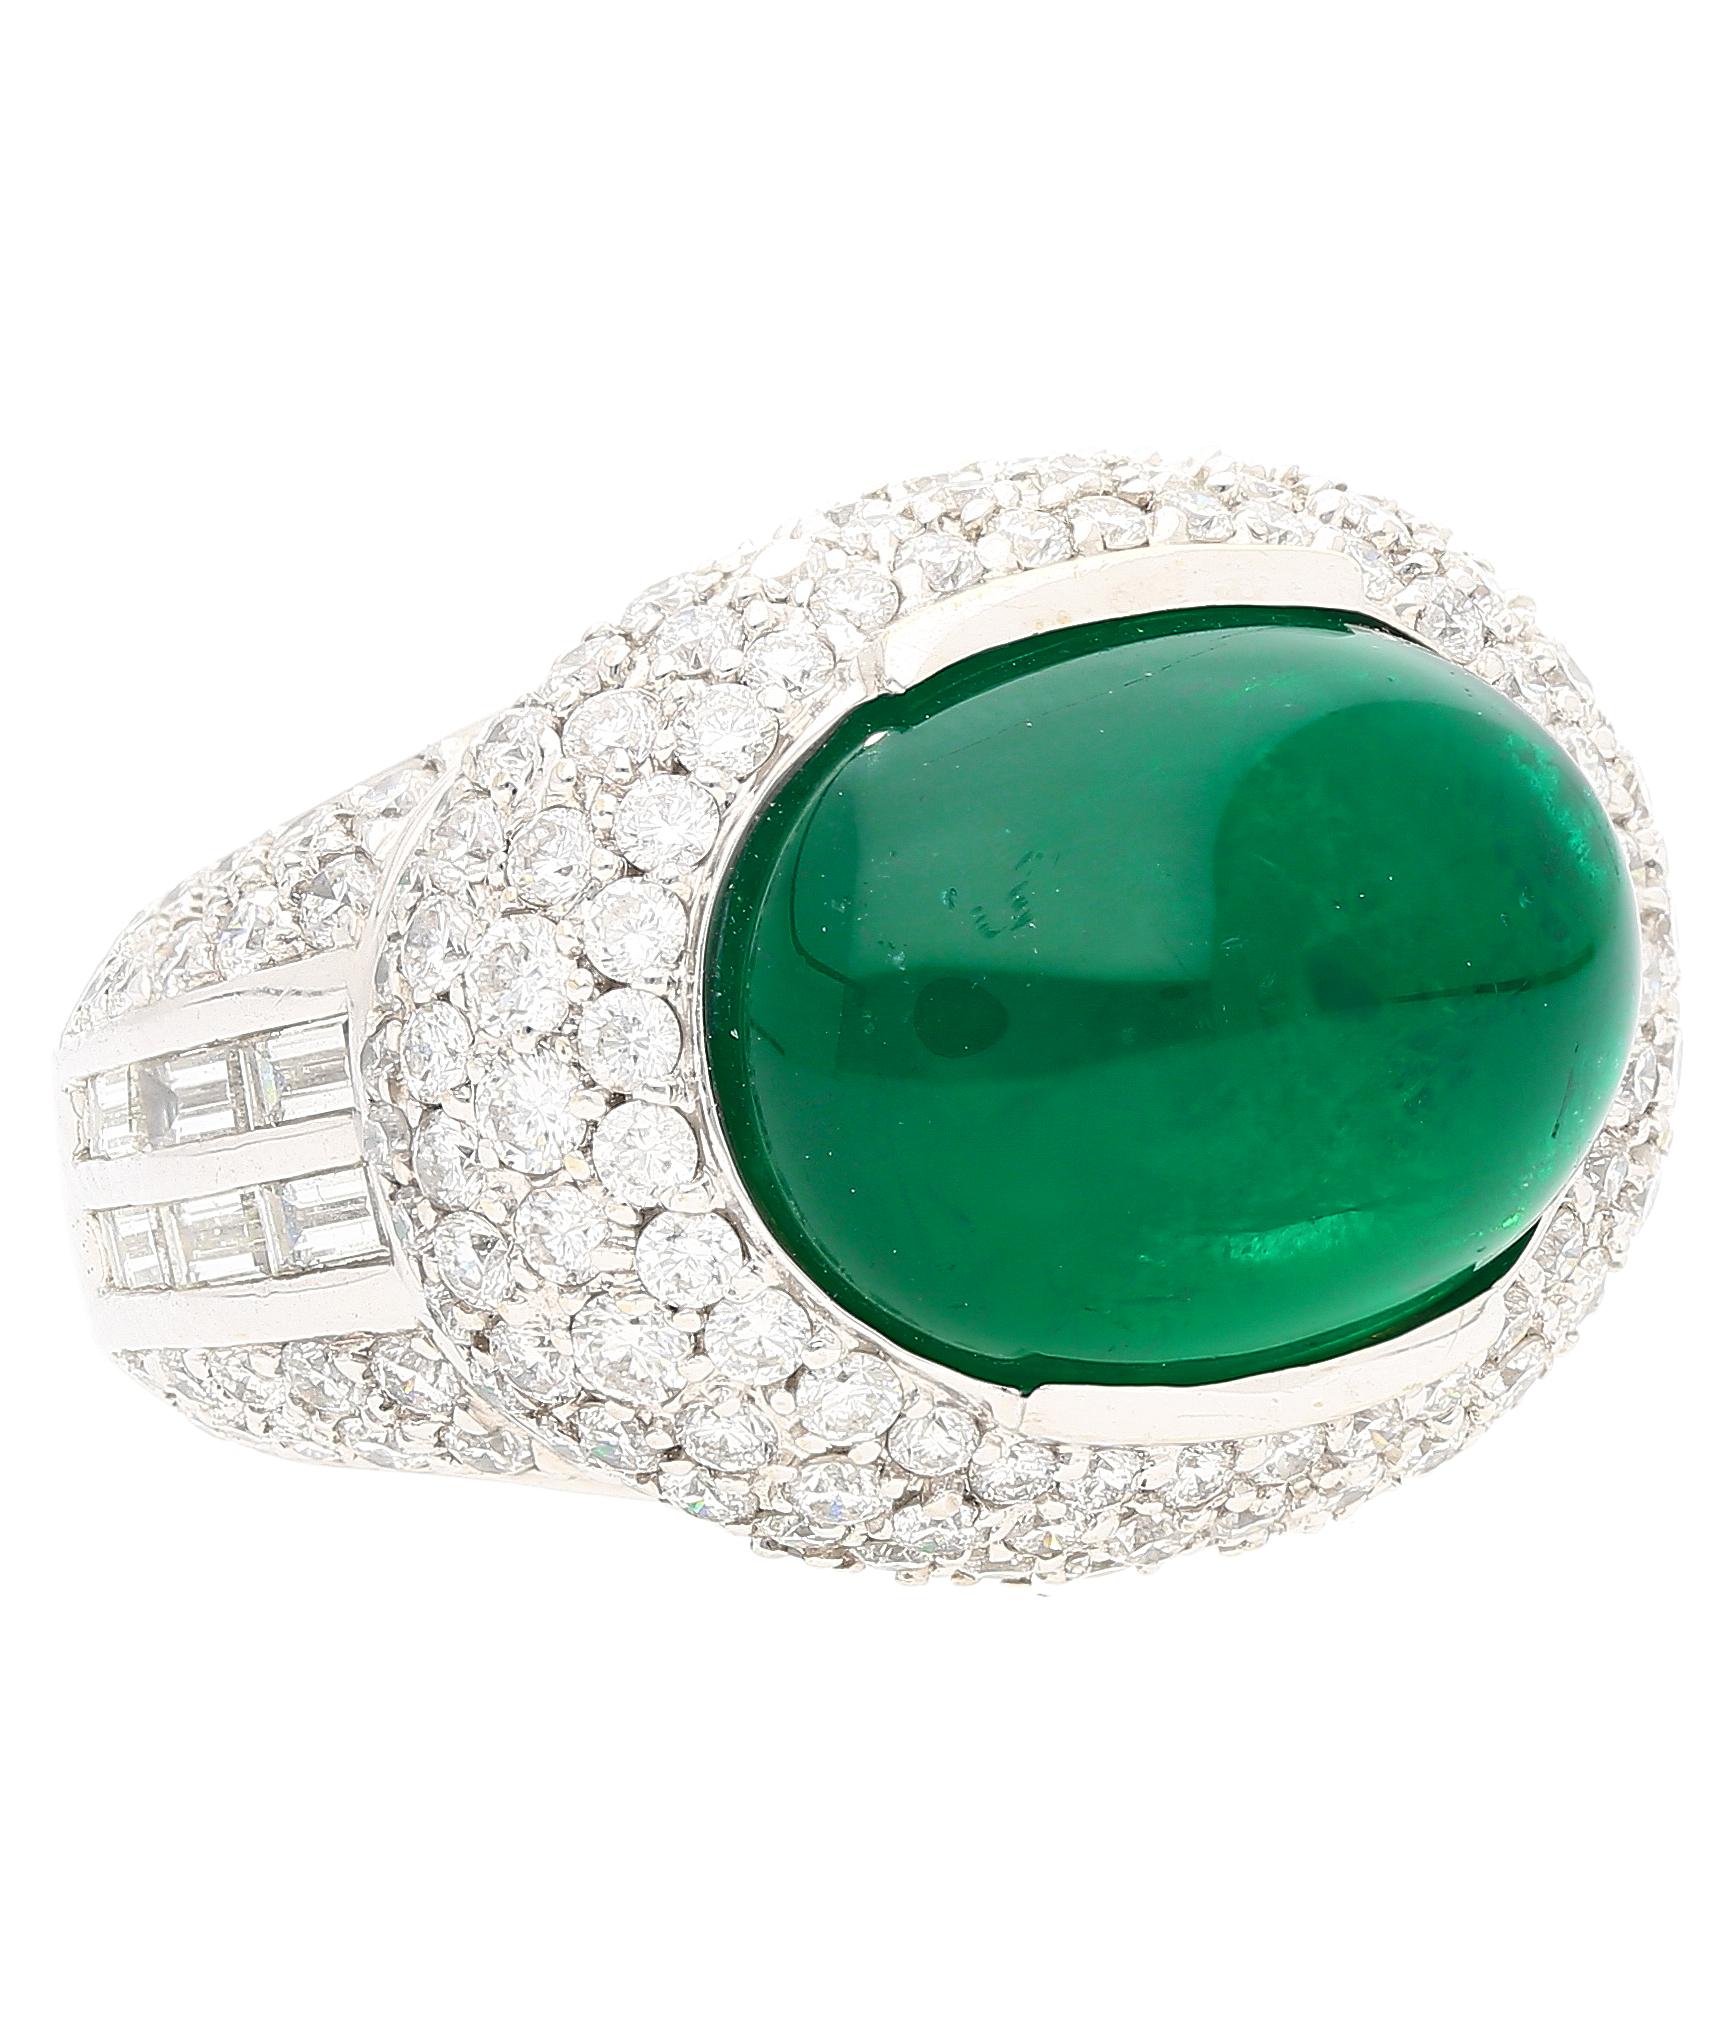 18K white gold multi-gemstone cluster cocktail ring. Featuring a 10.12 carat cabochon cut minor oil African emerald and 4.50 carats in baguette and round cut diamonds. This ring displays a gorgeous symmetrical aesthetic that fuses pristine quality